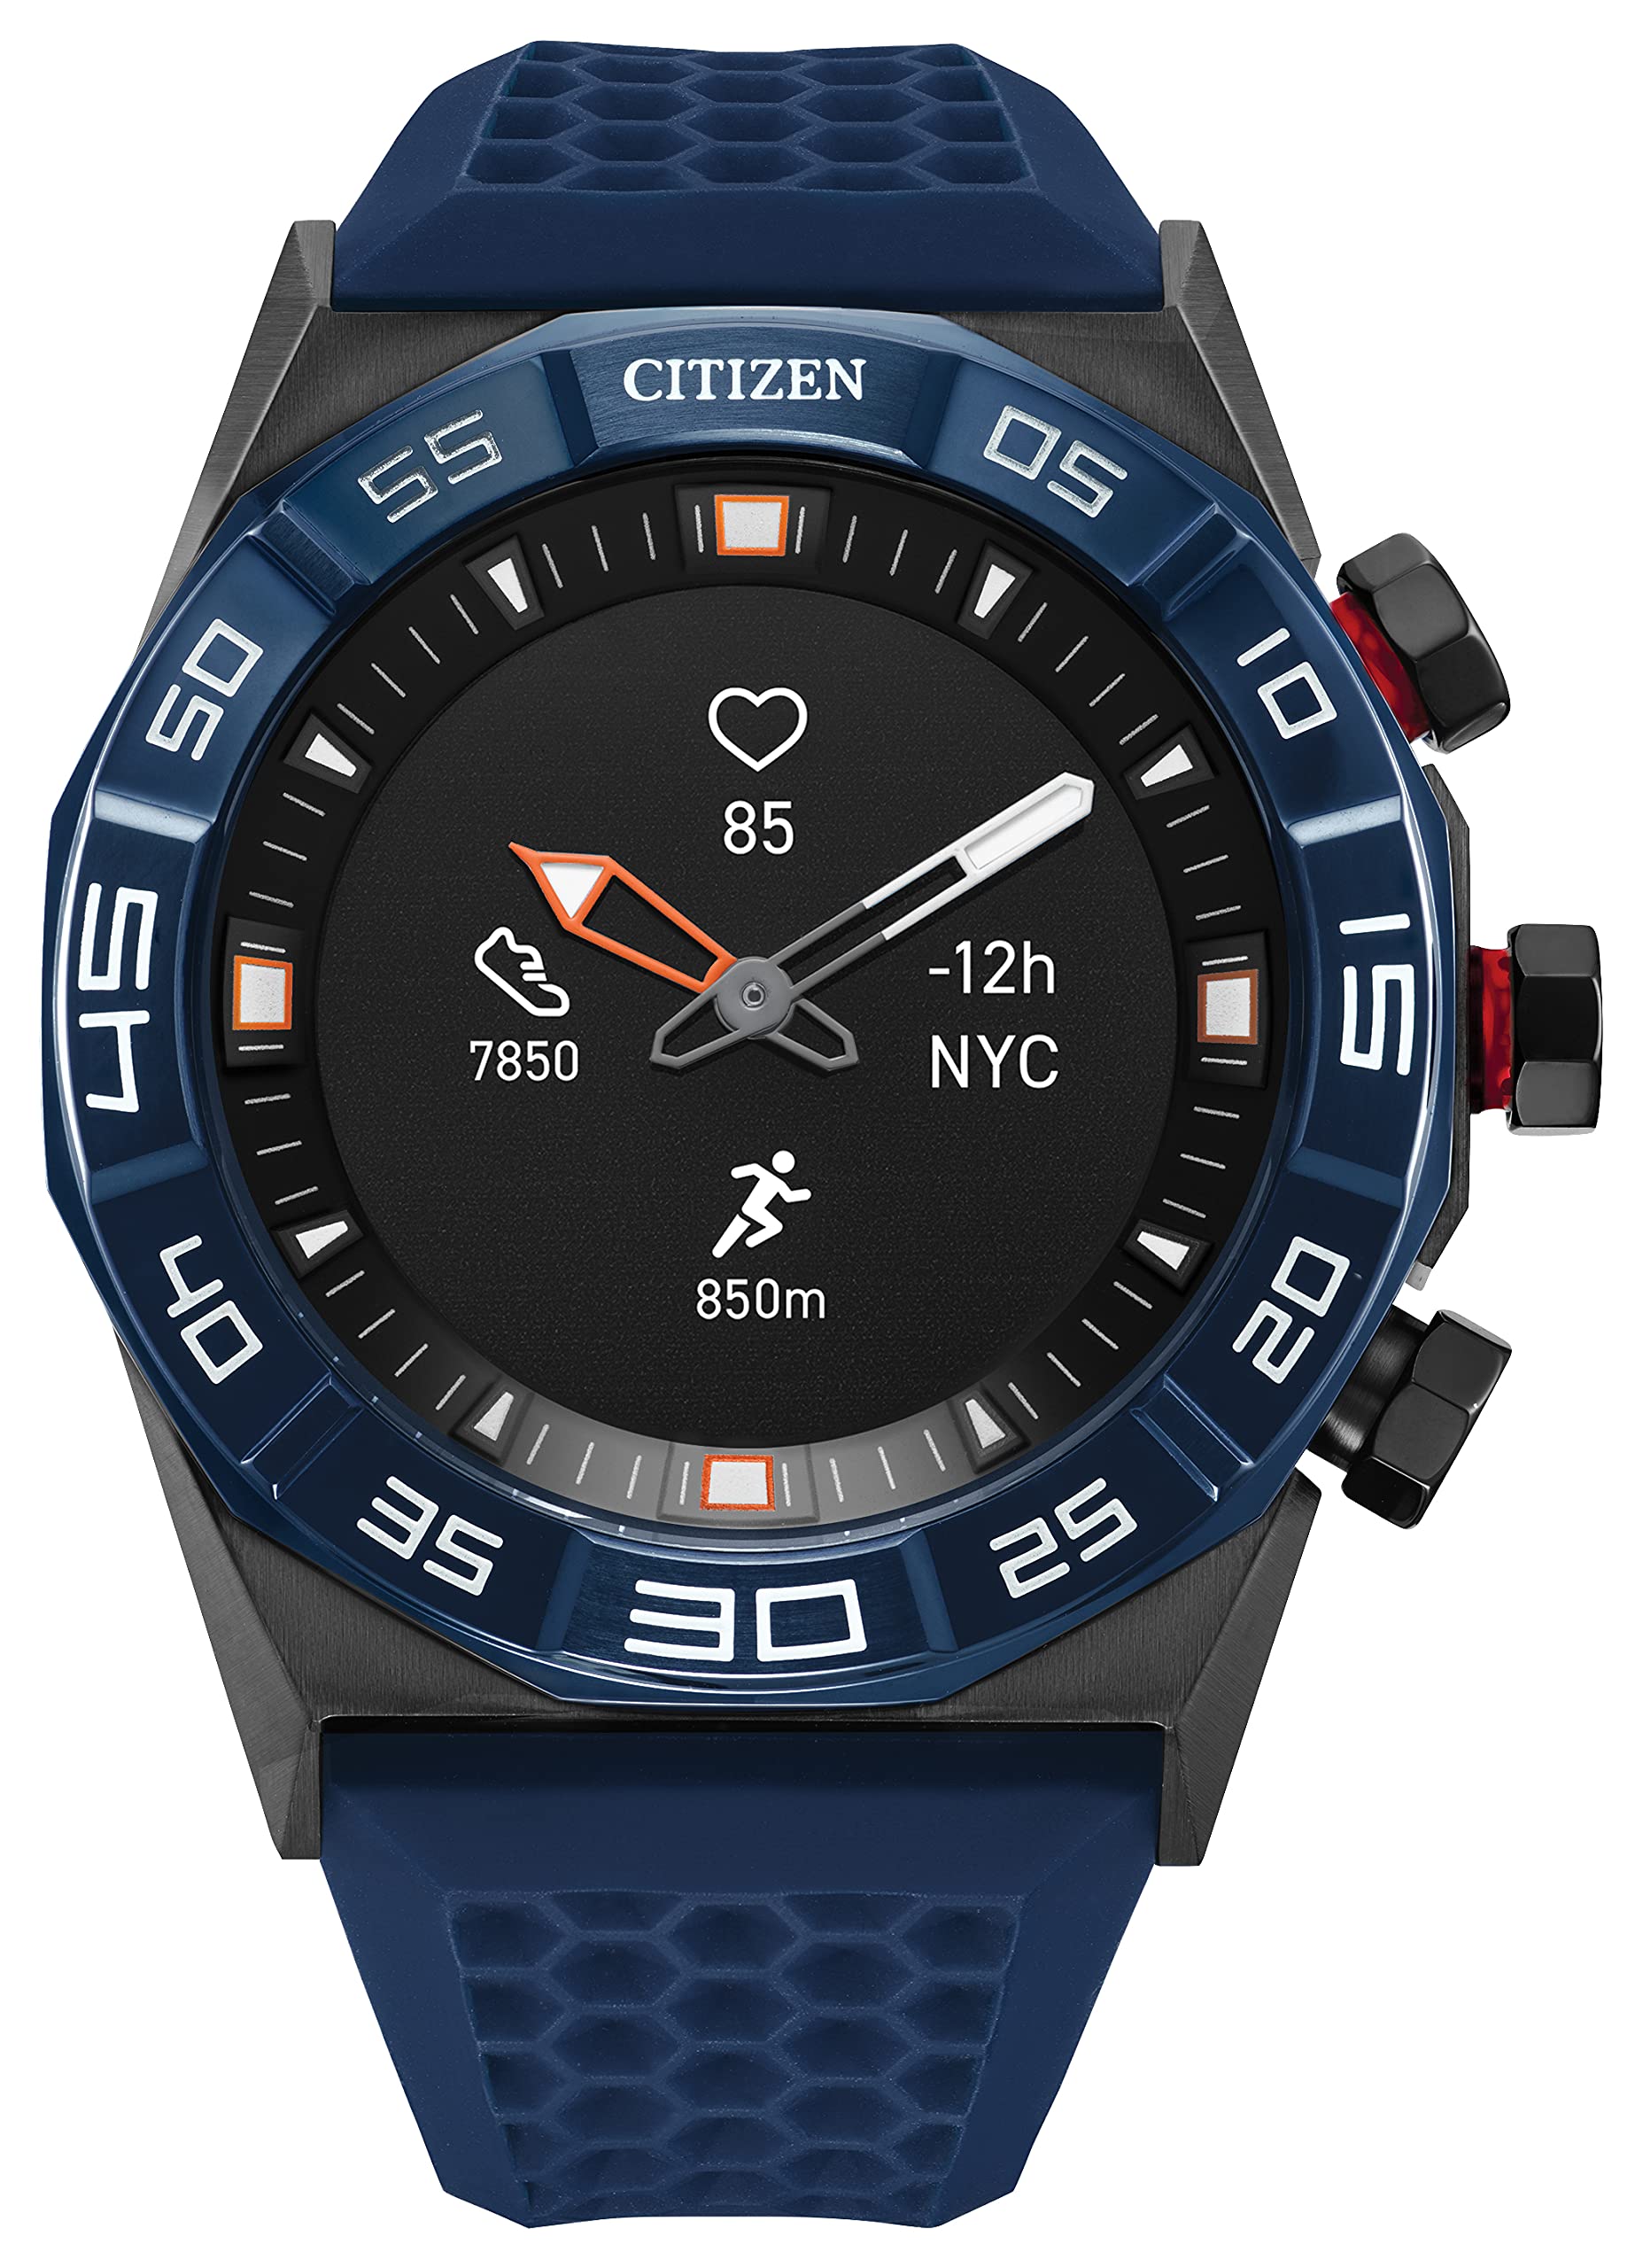 Mua Citizen CZ Smart Gen 1 Hybrid smartwatch 44mm, Continuous Heart Rate  Tracking, Fitness Activity, Golf App, Displays Notifications and Messages,  Bluetooth Connection, 15 Day Battery Life trên Amazon Mỹ chính hãng 2023 |  Giaonhan247